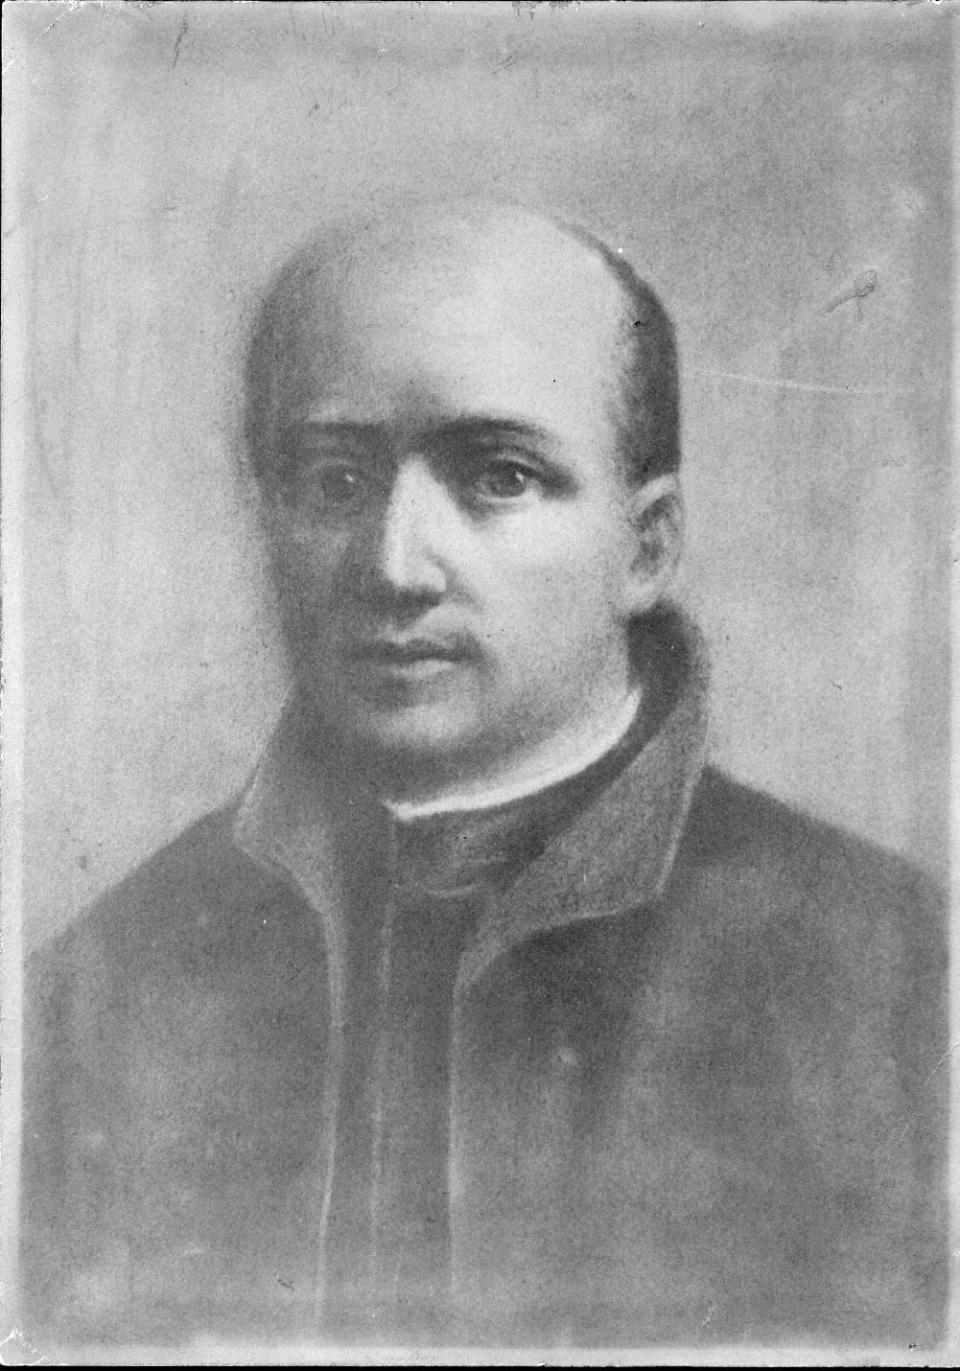 Fr. Jaques Marquette was the first explorer to write down a name for Wisconsin in 1673.